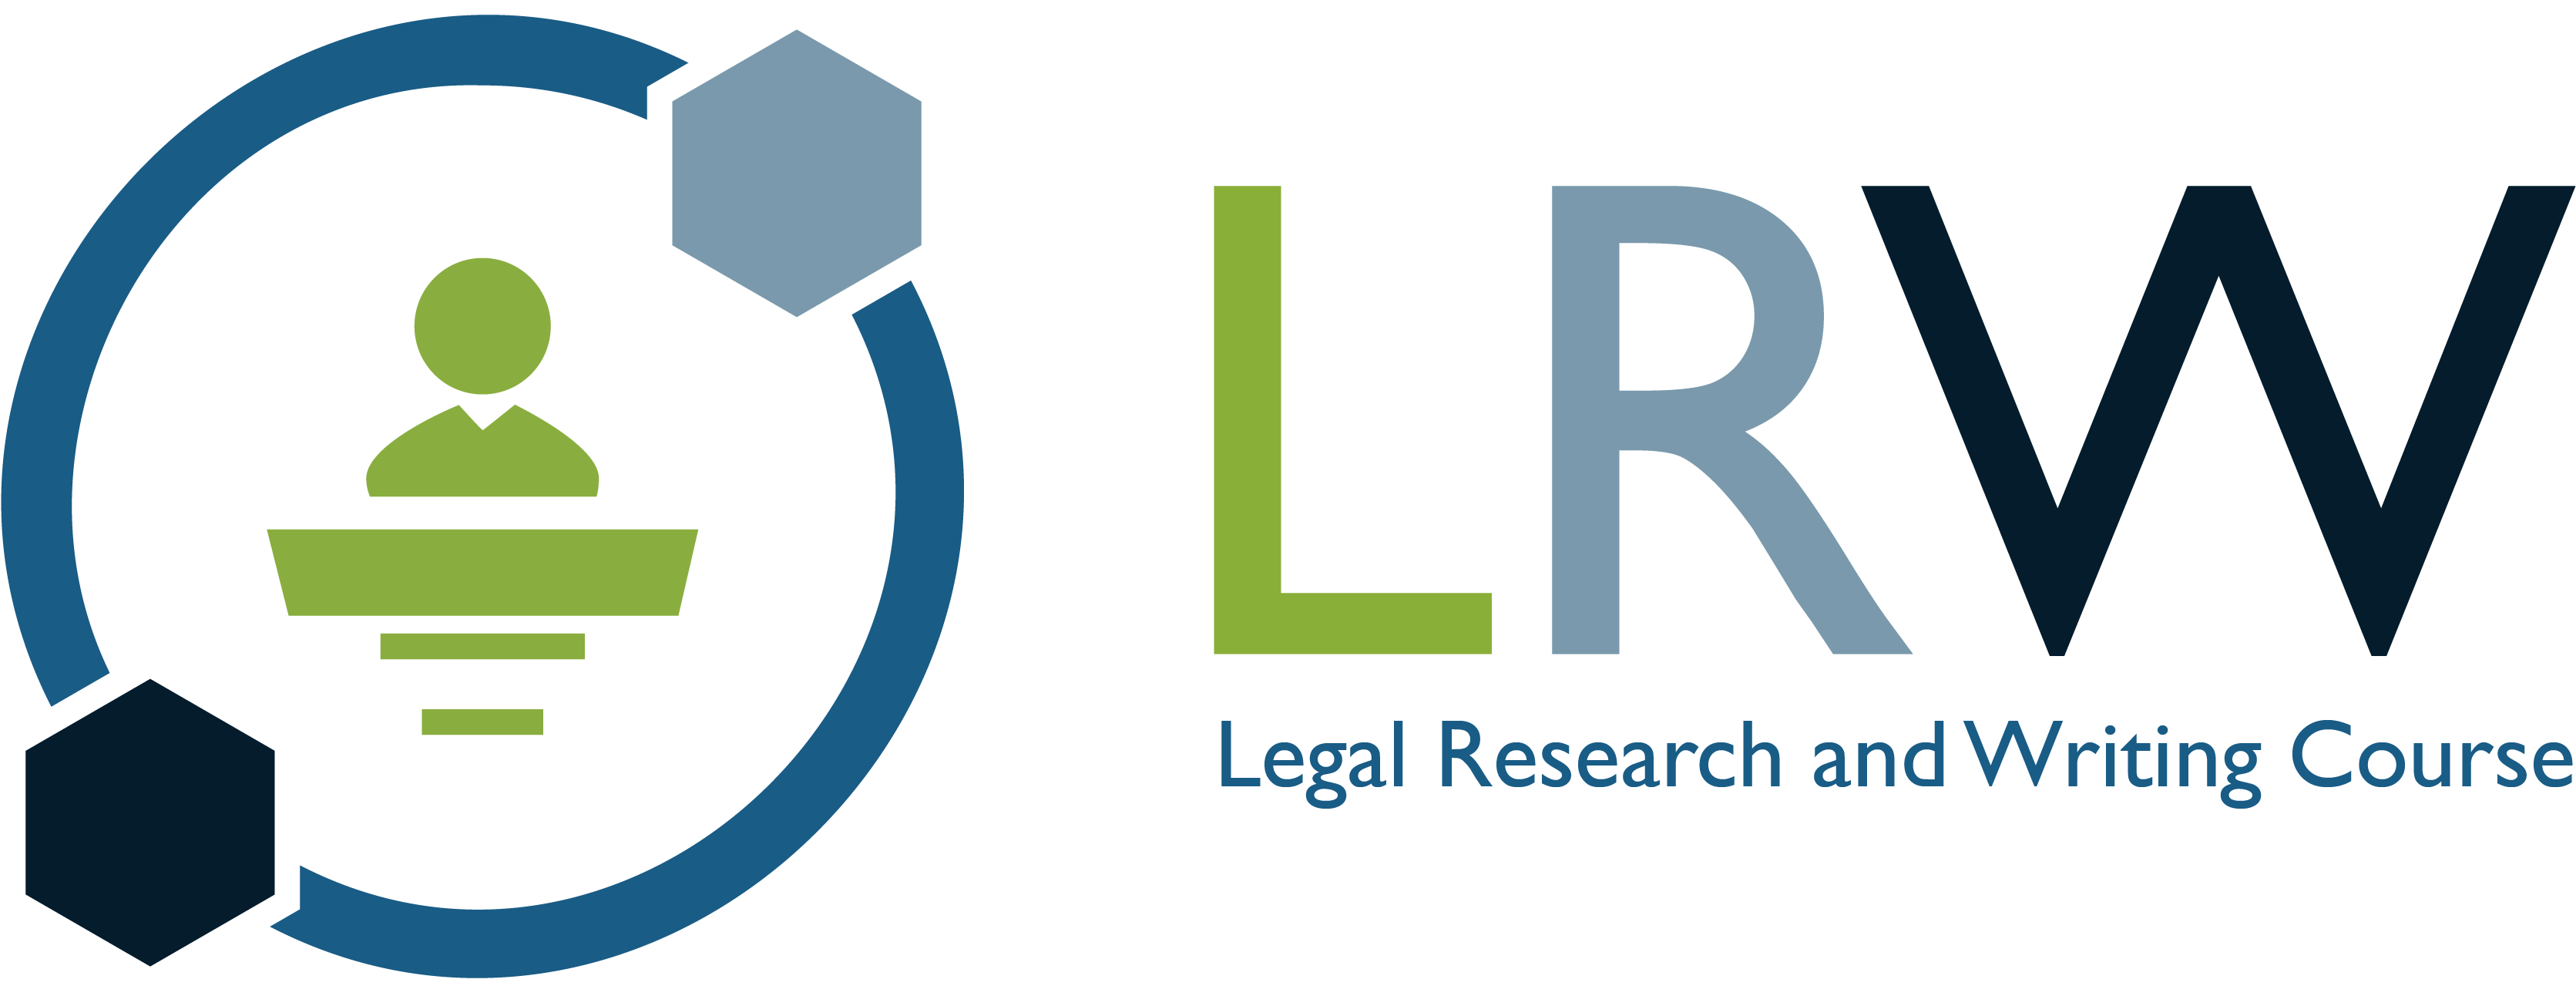 legal research and writing refresher course